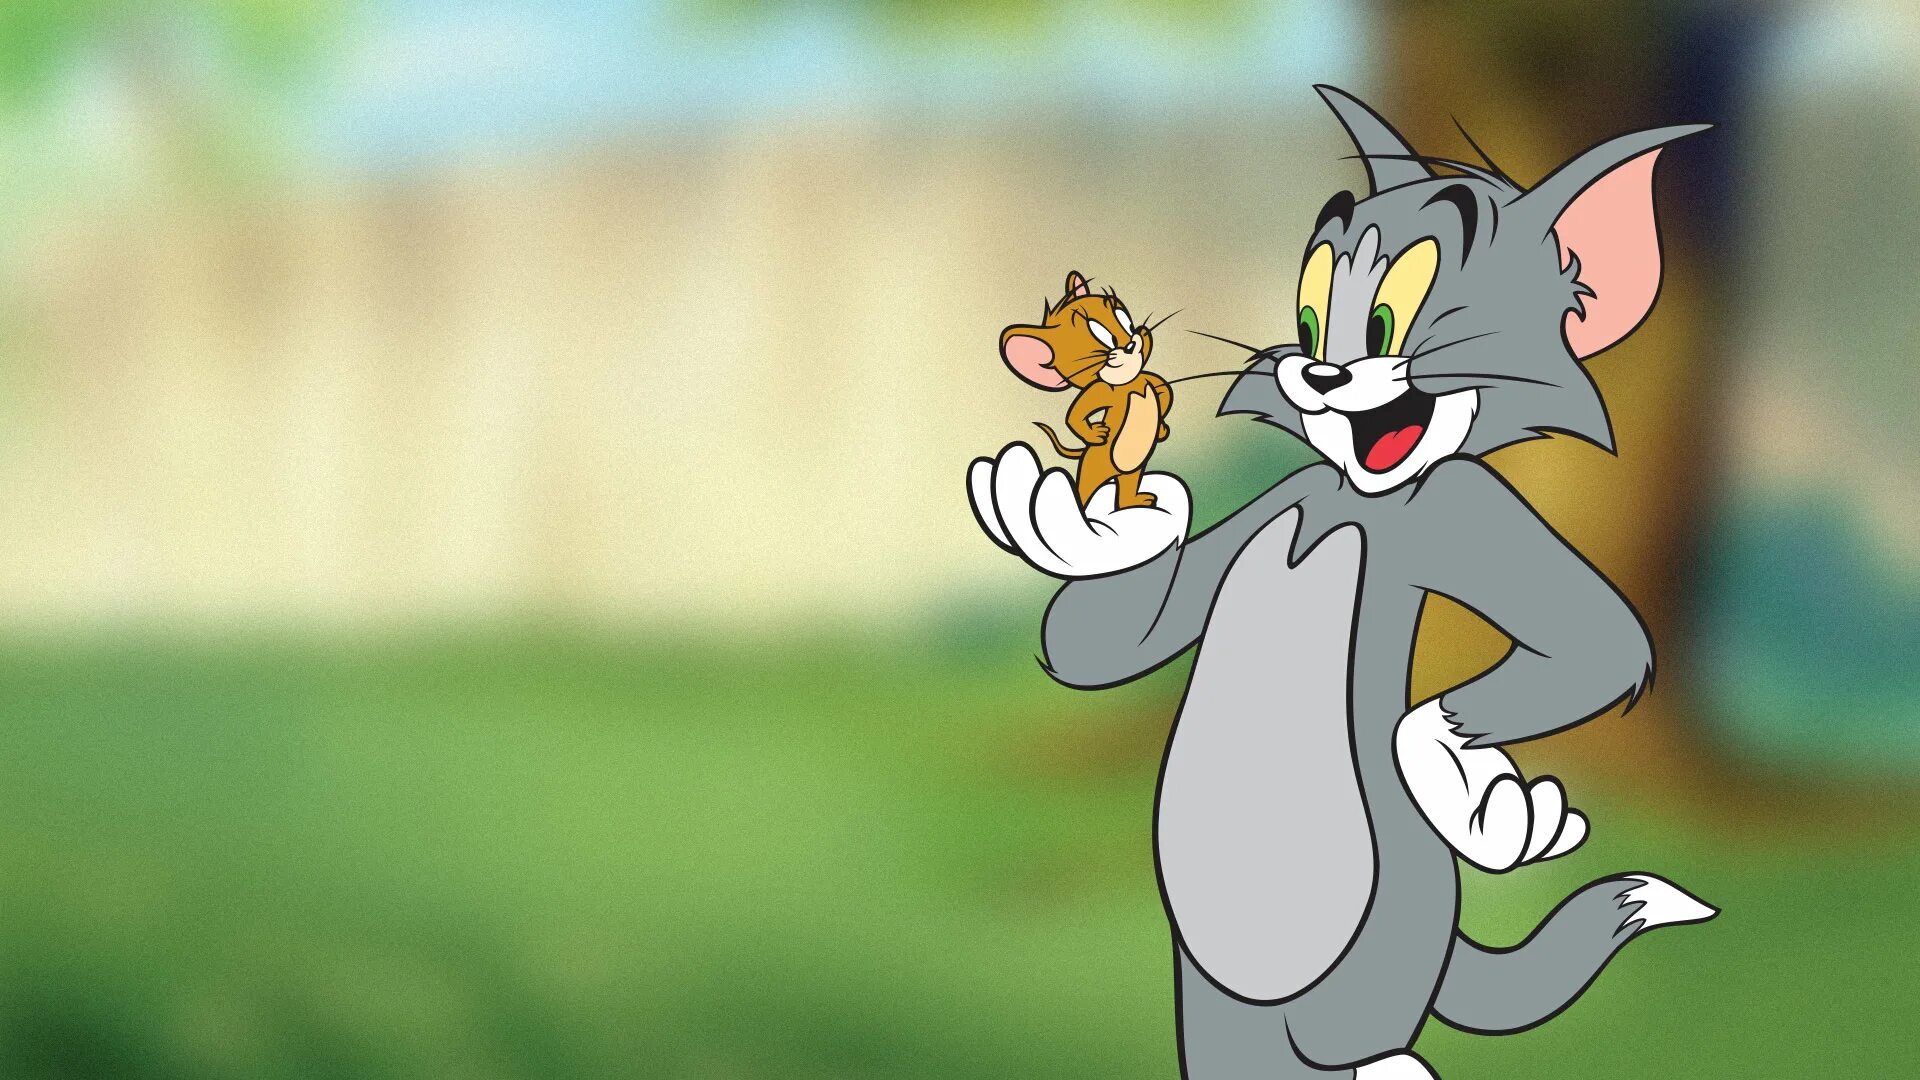 Tom and Jerry. Tommy jeryh. Том и Джерри (Tom and Jerry) 1940. Tom and Jerry 2012.